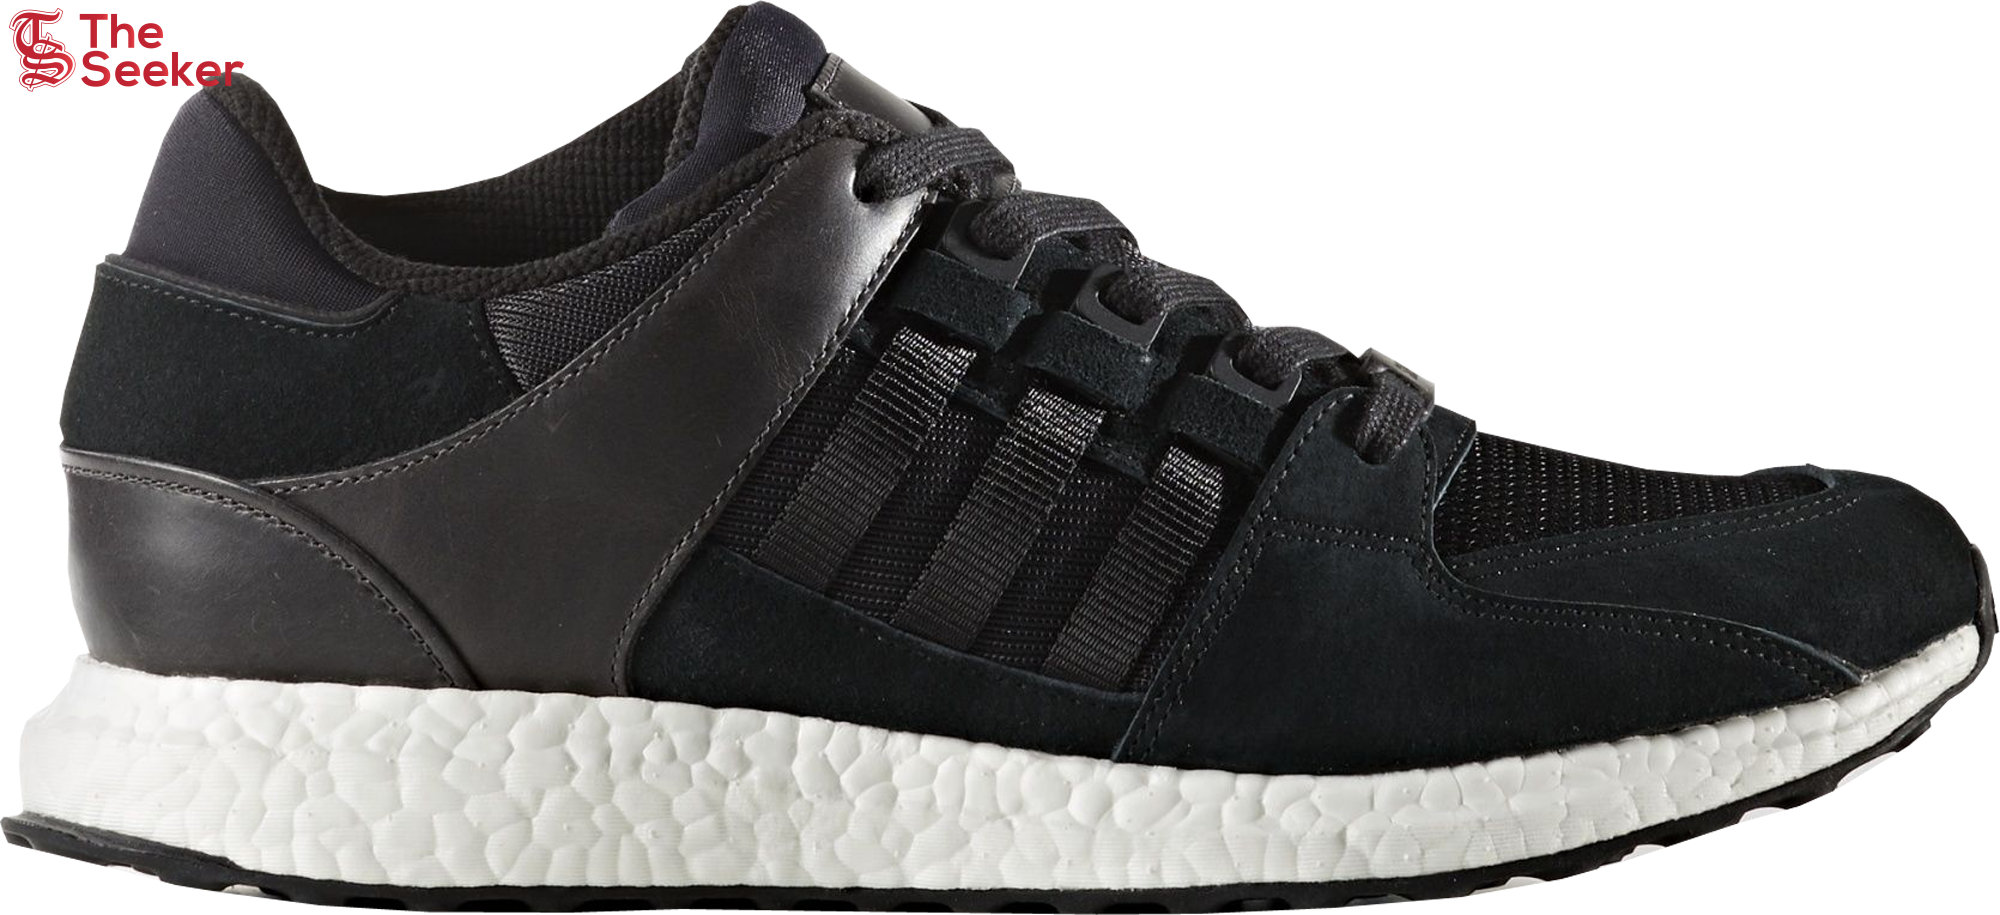 adidas EQT Support Ultra Milled Leather Black